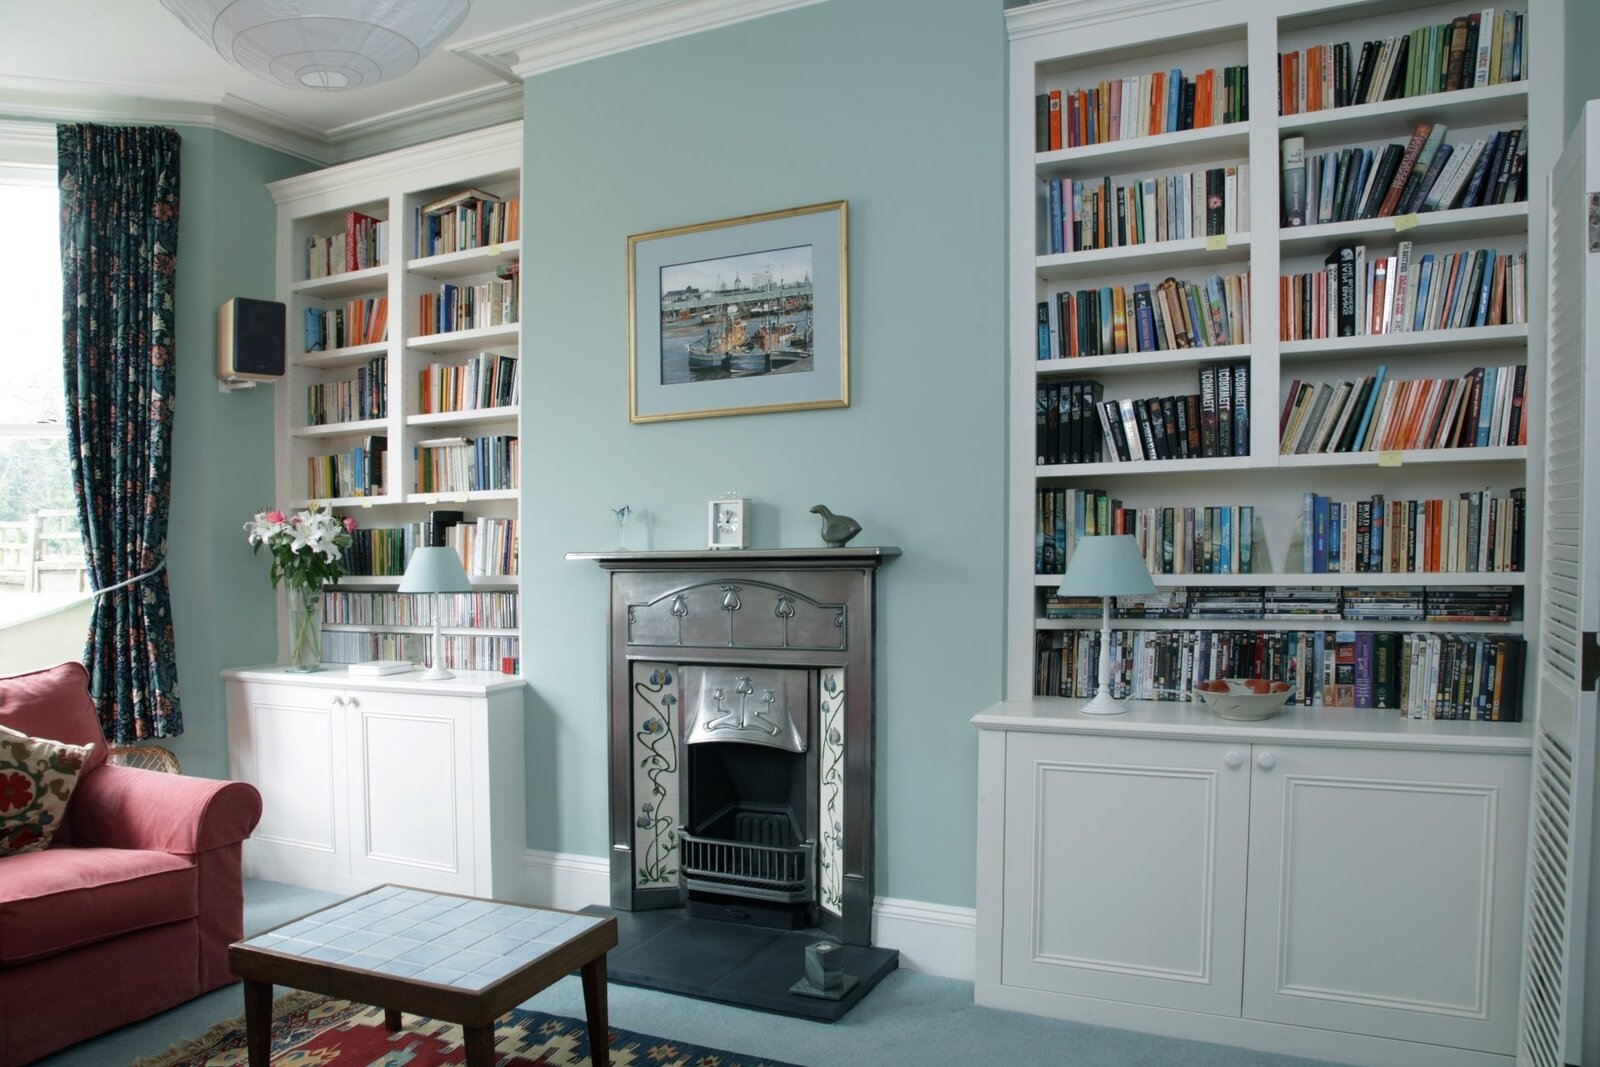 alcove-bookcases-throughout-newest-e2999b-bespoke-alcove-bookcases-joat-london-bespoke-furnitu...jpg